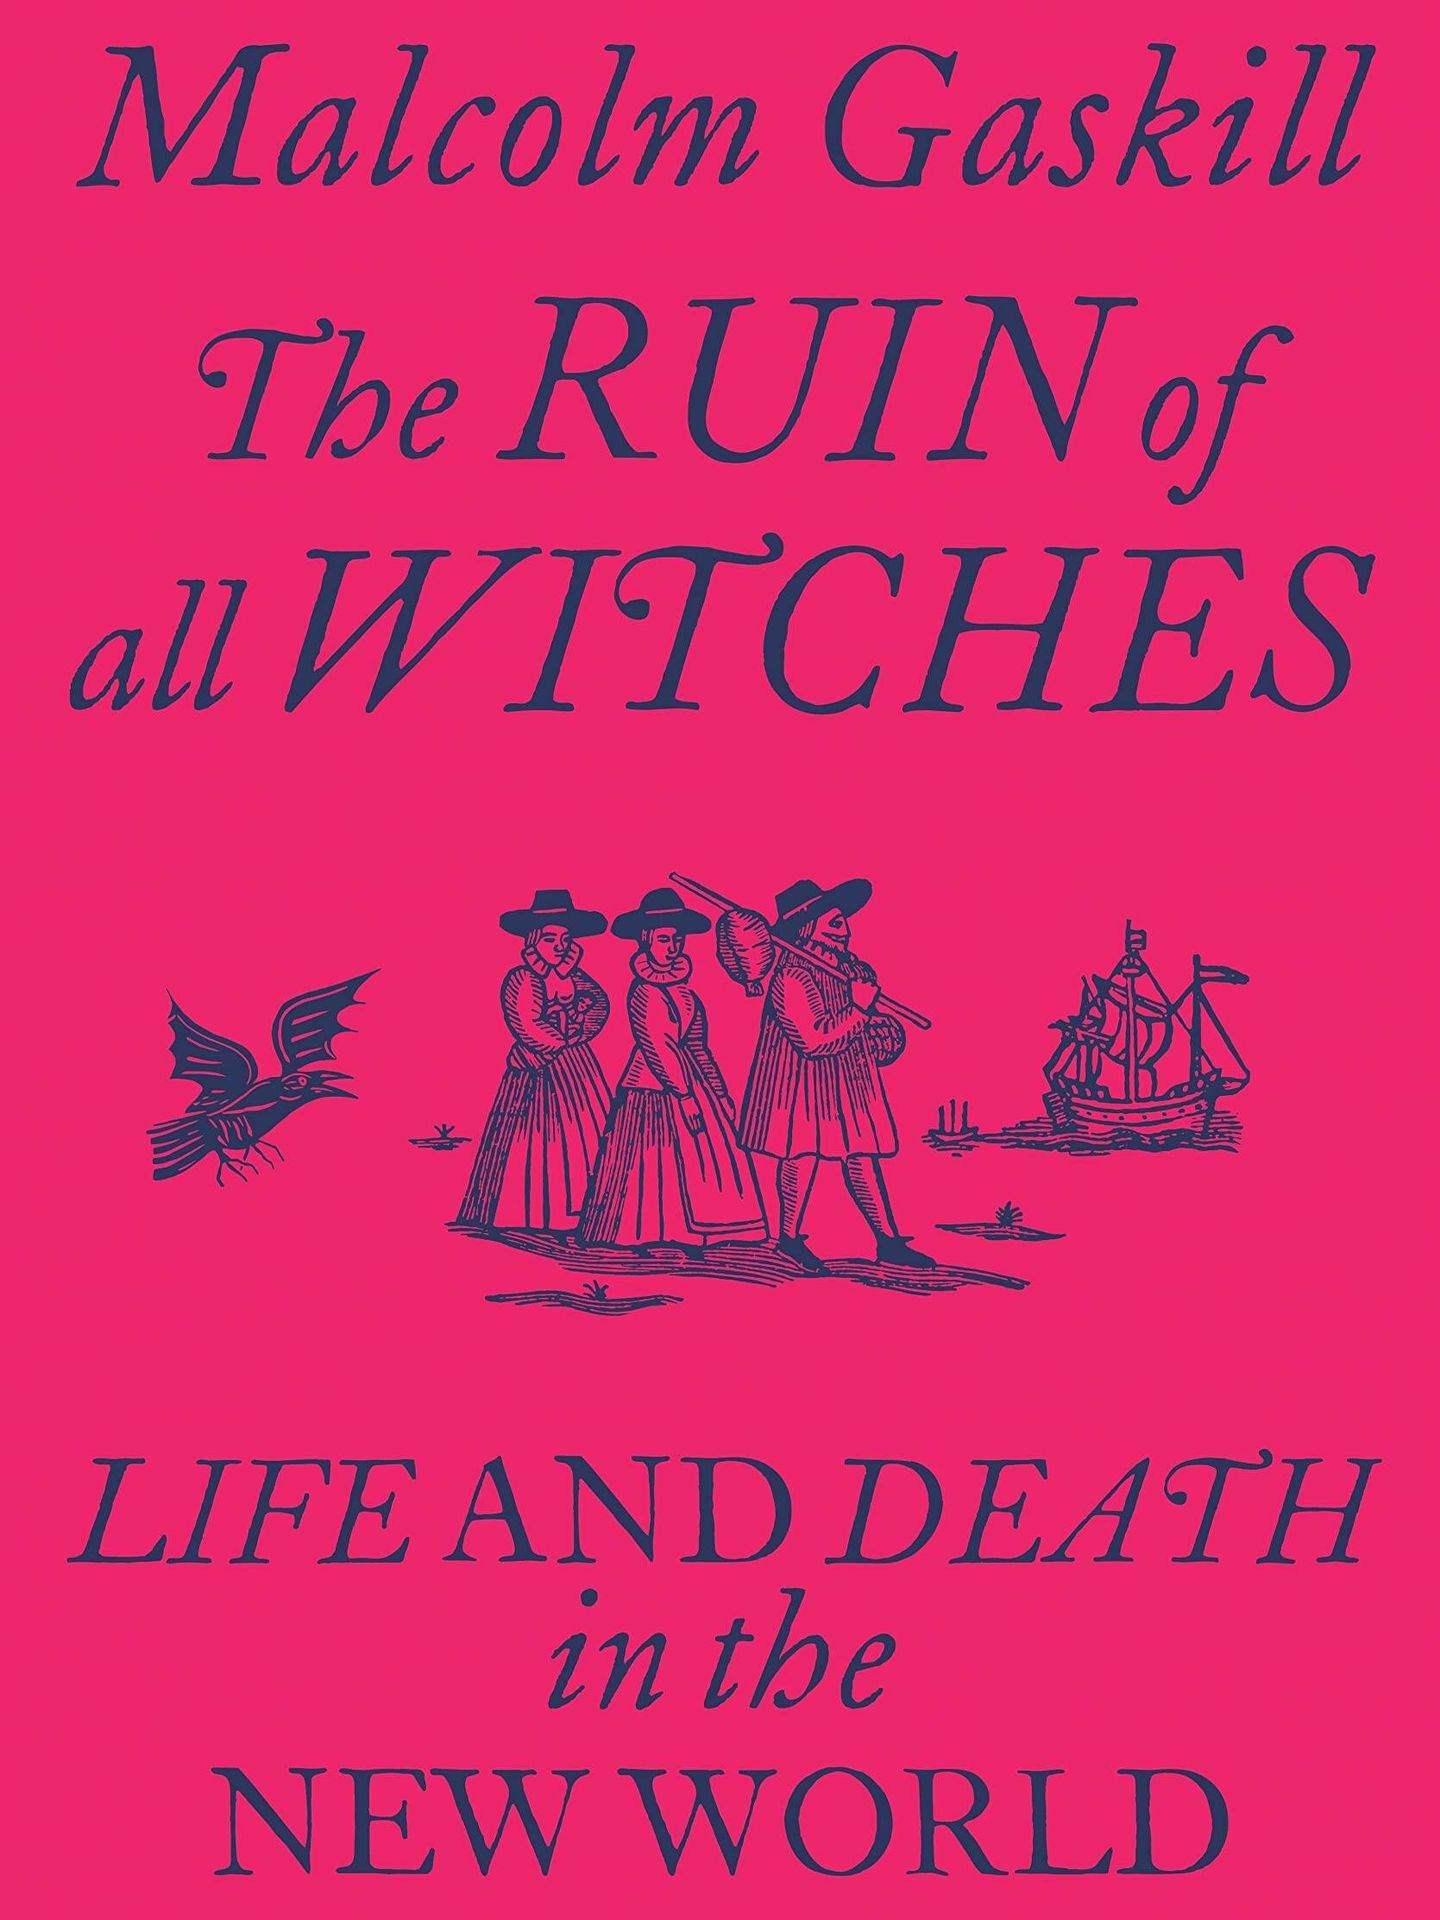 'The Ruin of all Witches'